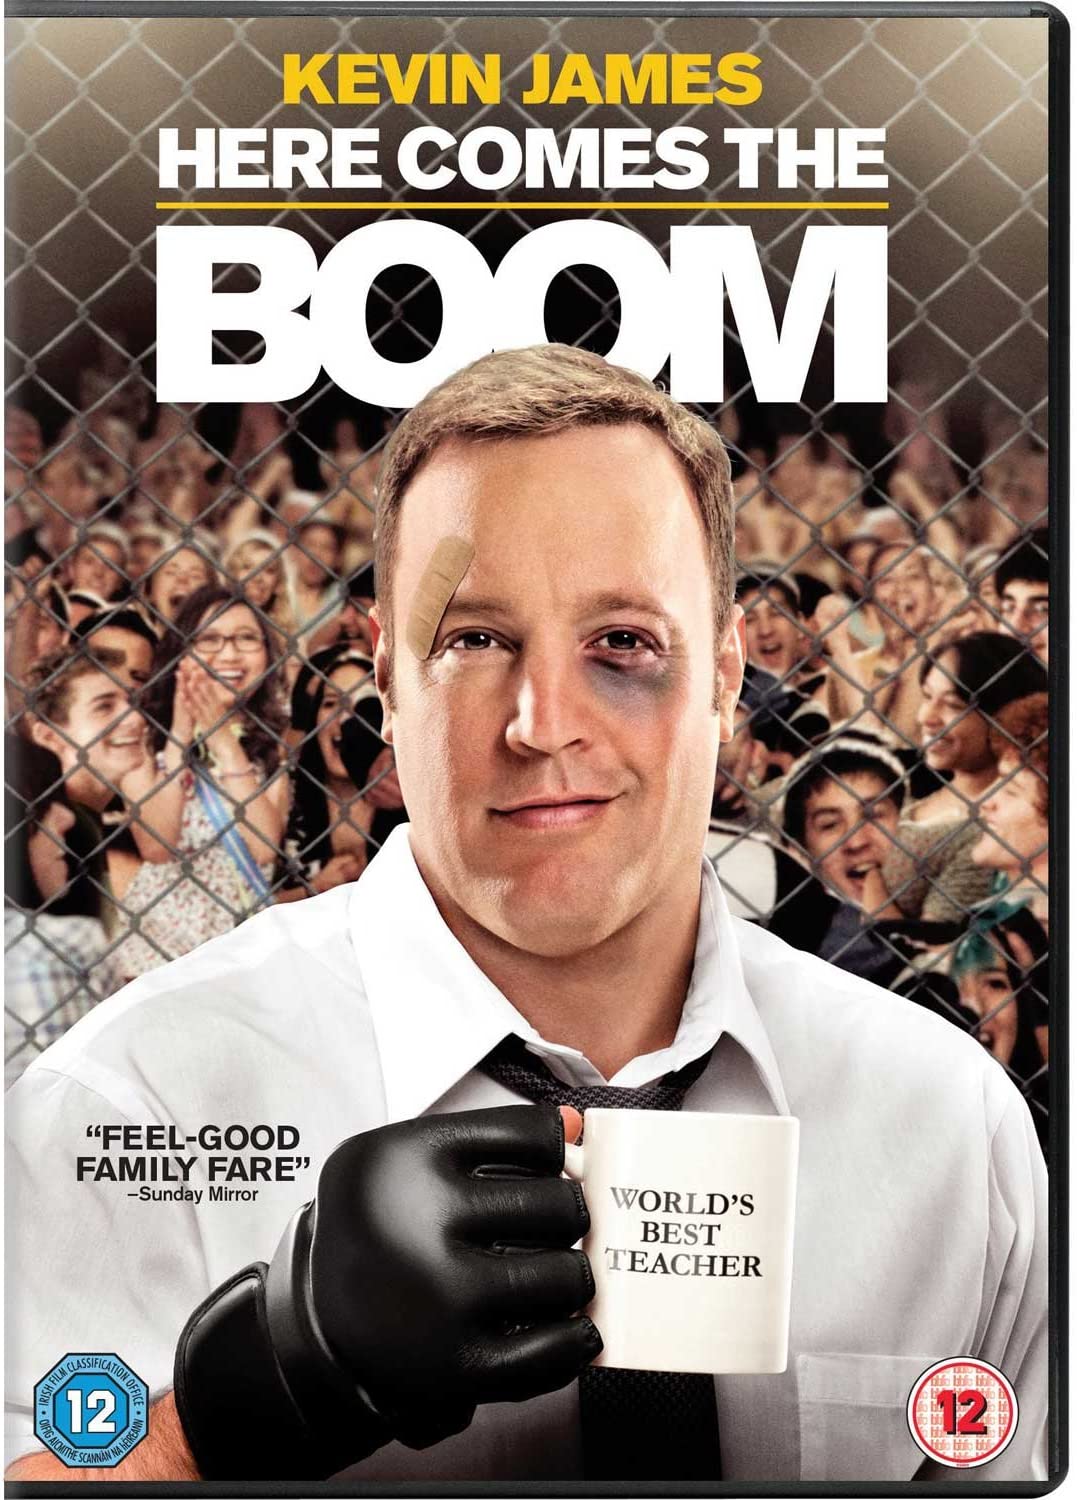 Here Comes The Boom [2012] - Comedy/Action [DVD]